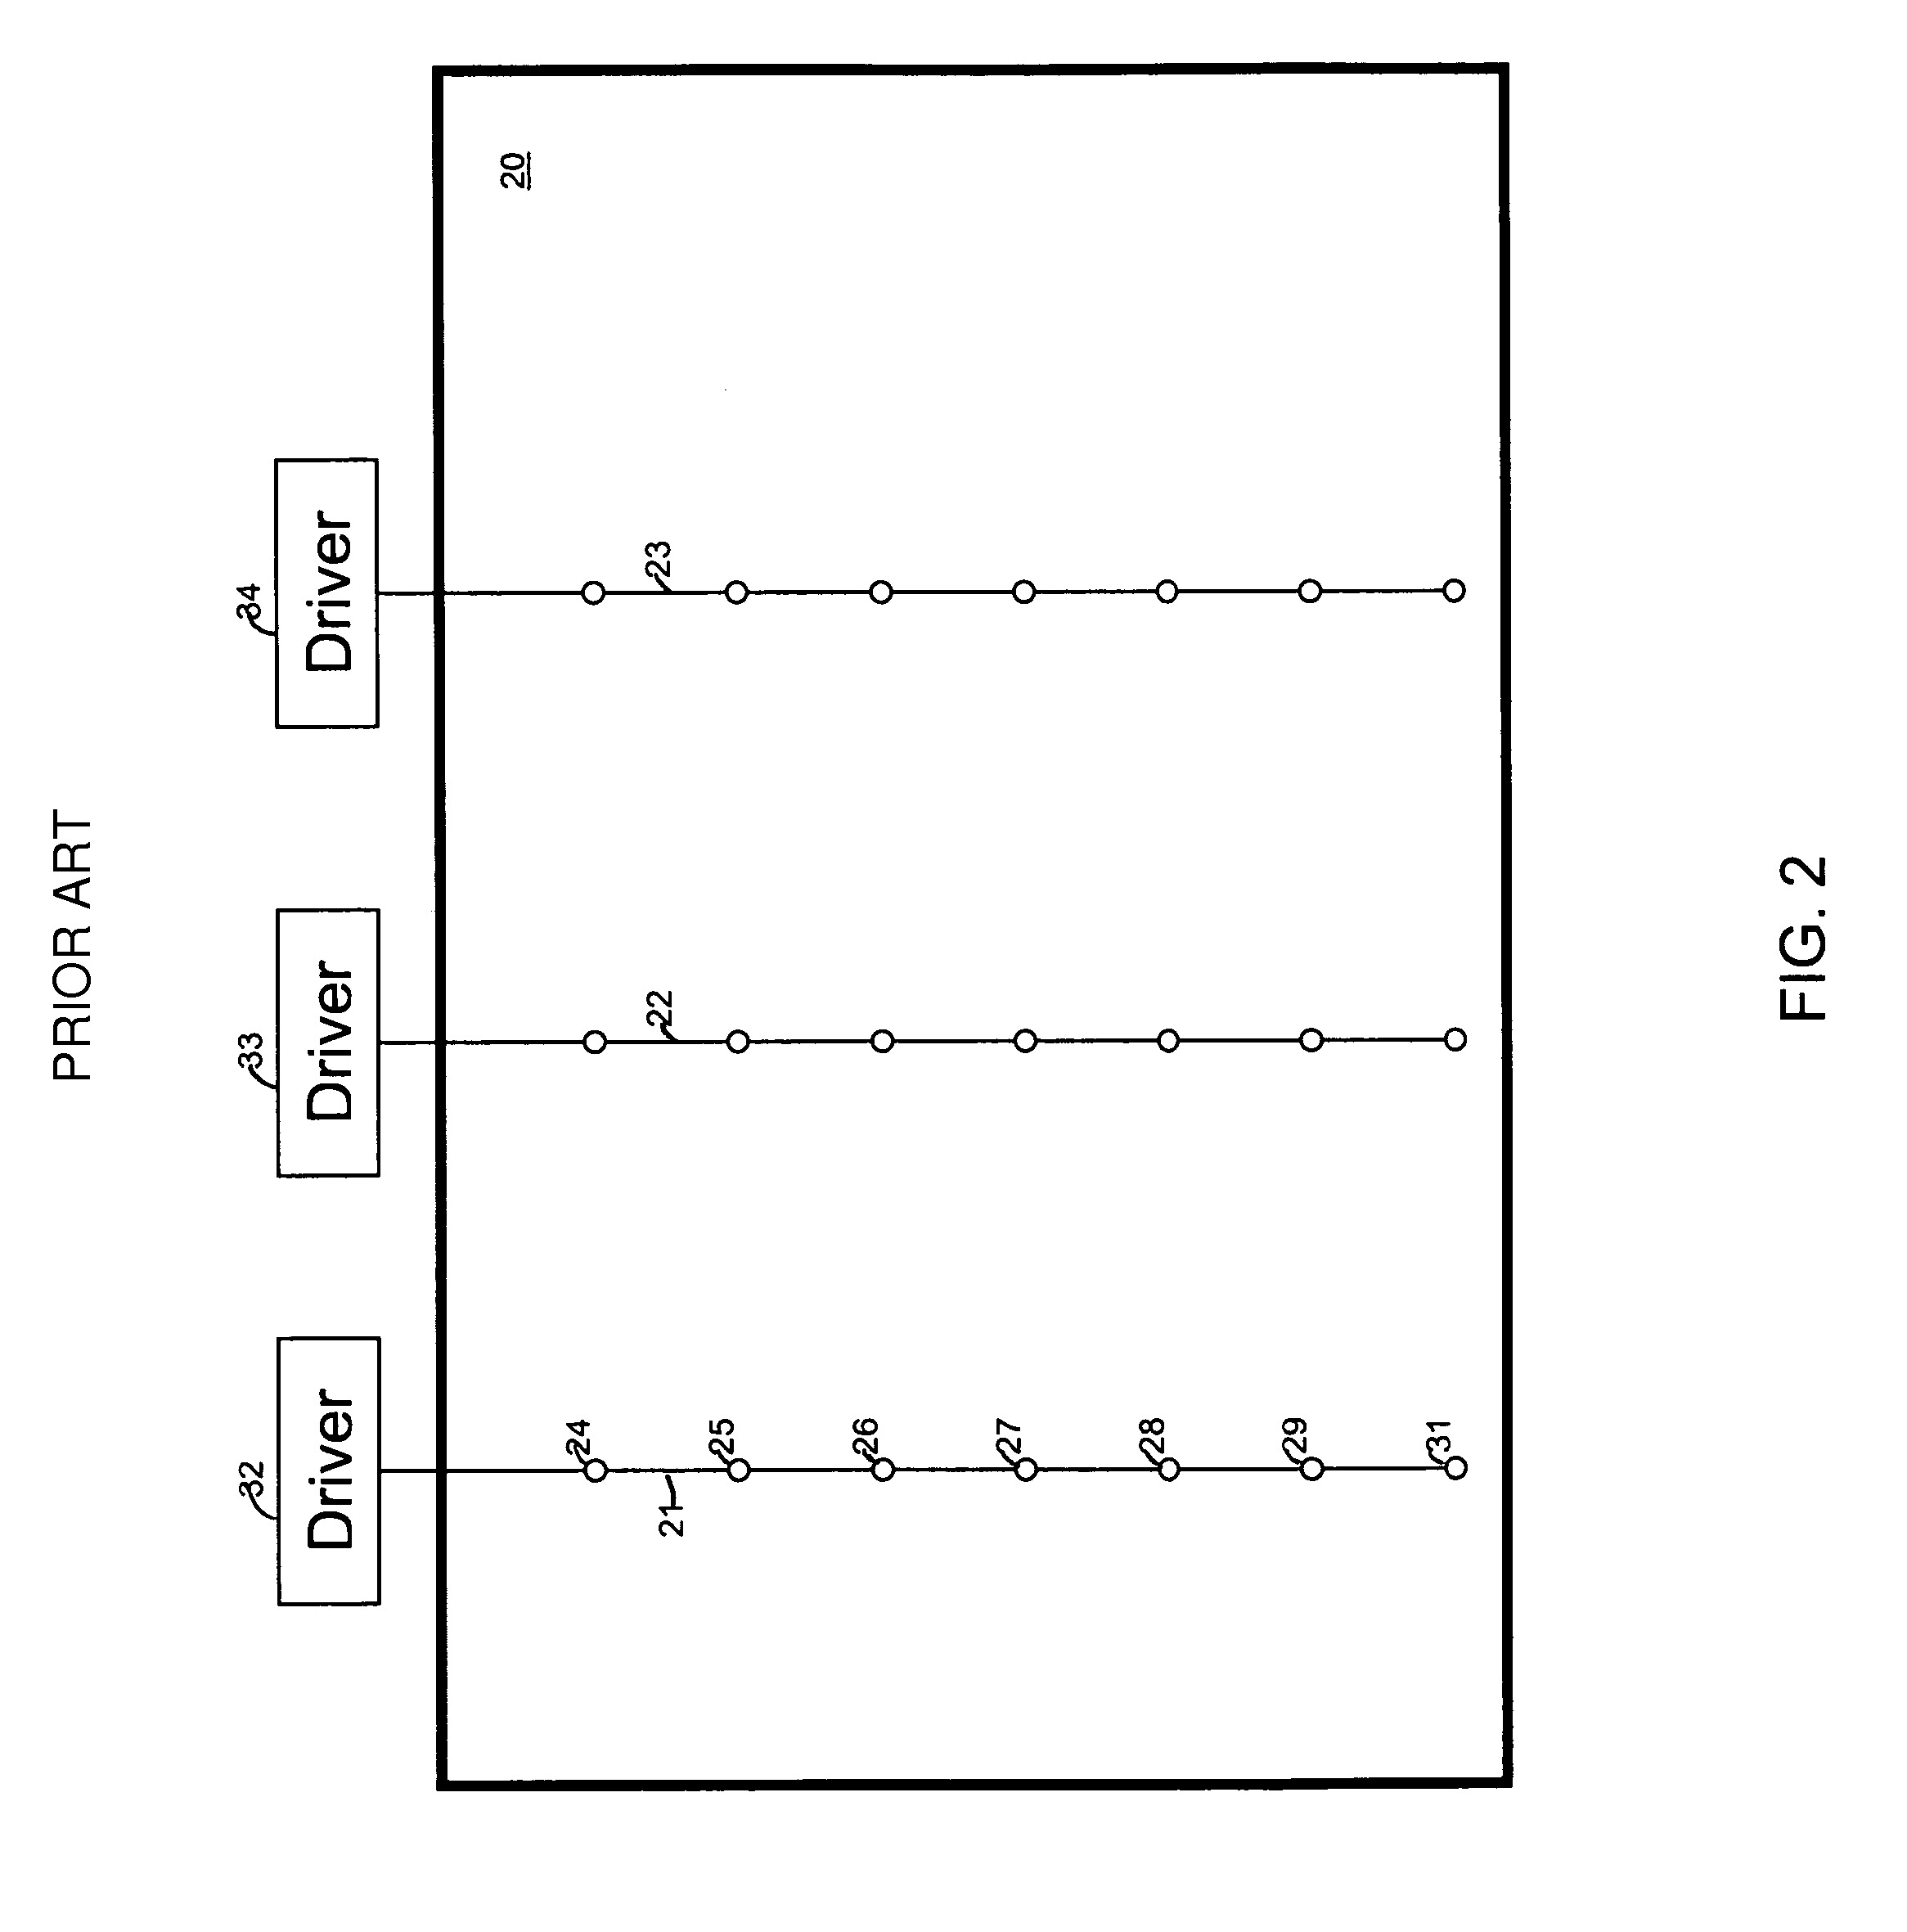 System and method for controlling a multi-string light emitting diode backlighting system for an electronic display